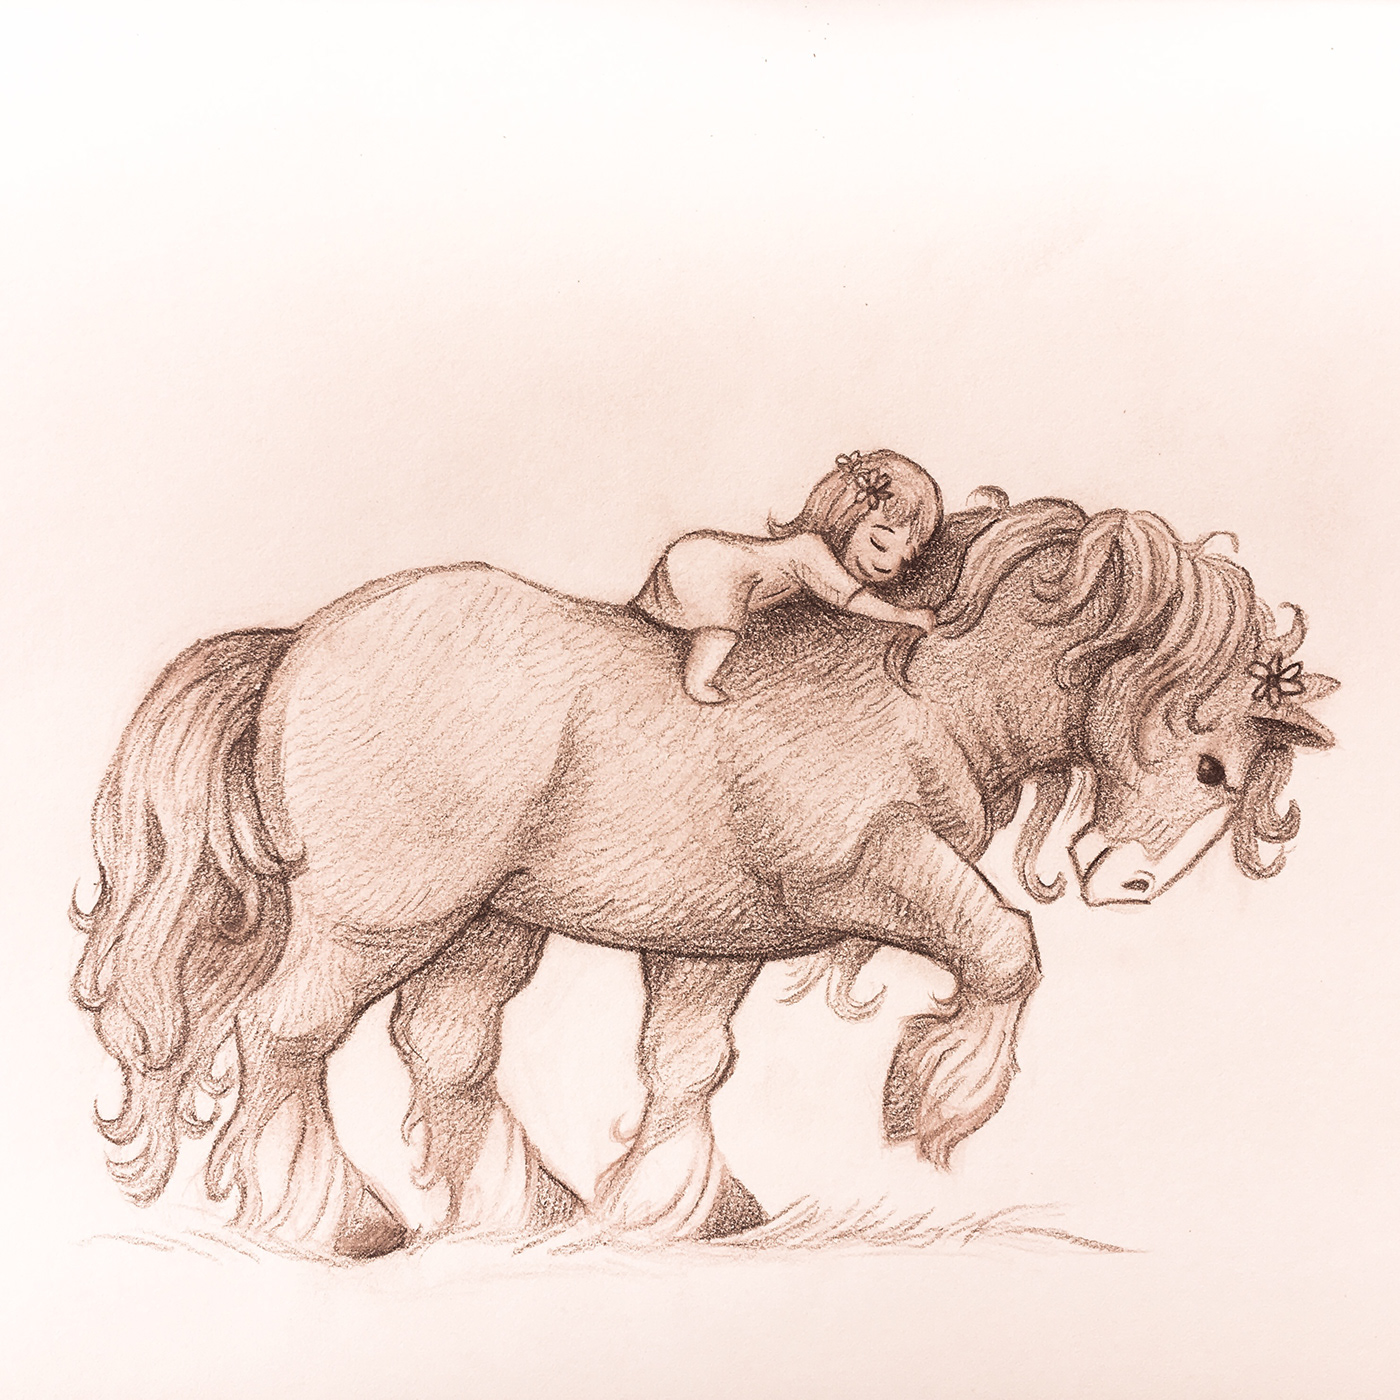 100dayproject animals bears children crittersandkiddos dogs drawings graphite horses palomino blackwing Pencil drawing pencil sketches pets Picture book sketchbook sketchbooks sketches the100dayproject